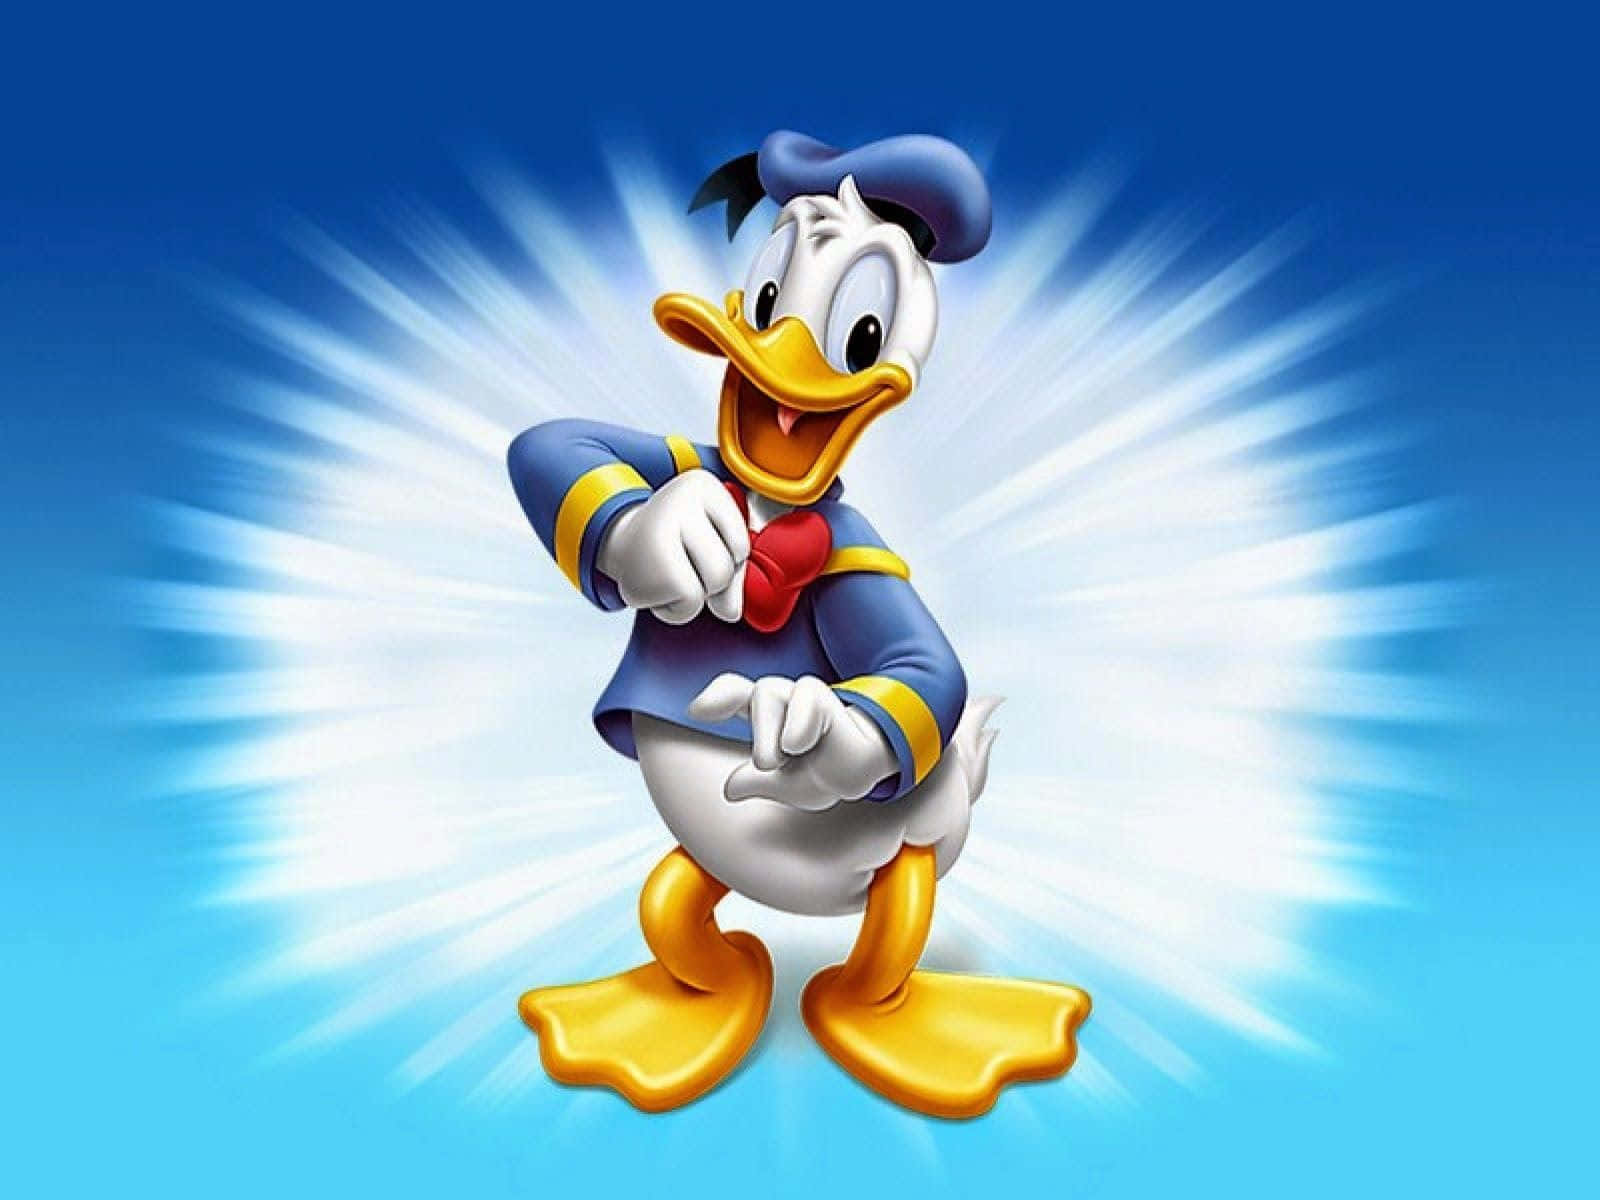 Funny Donald Duck Cartoon Art Smiling Pictures